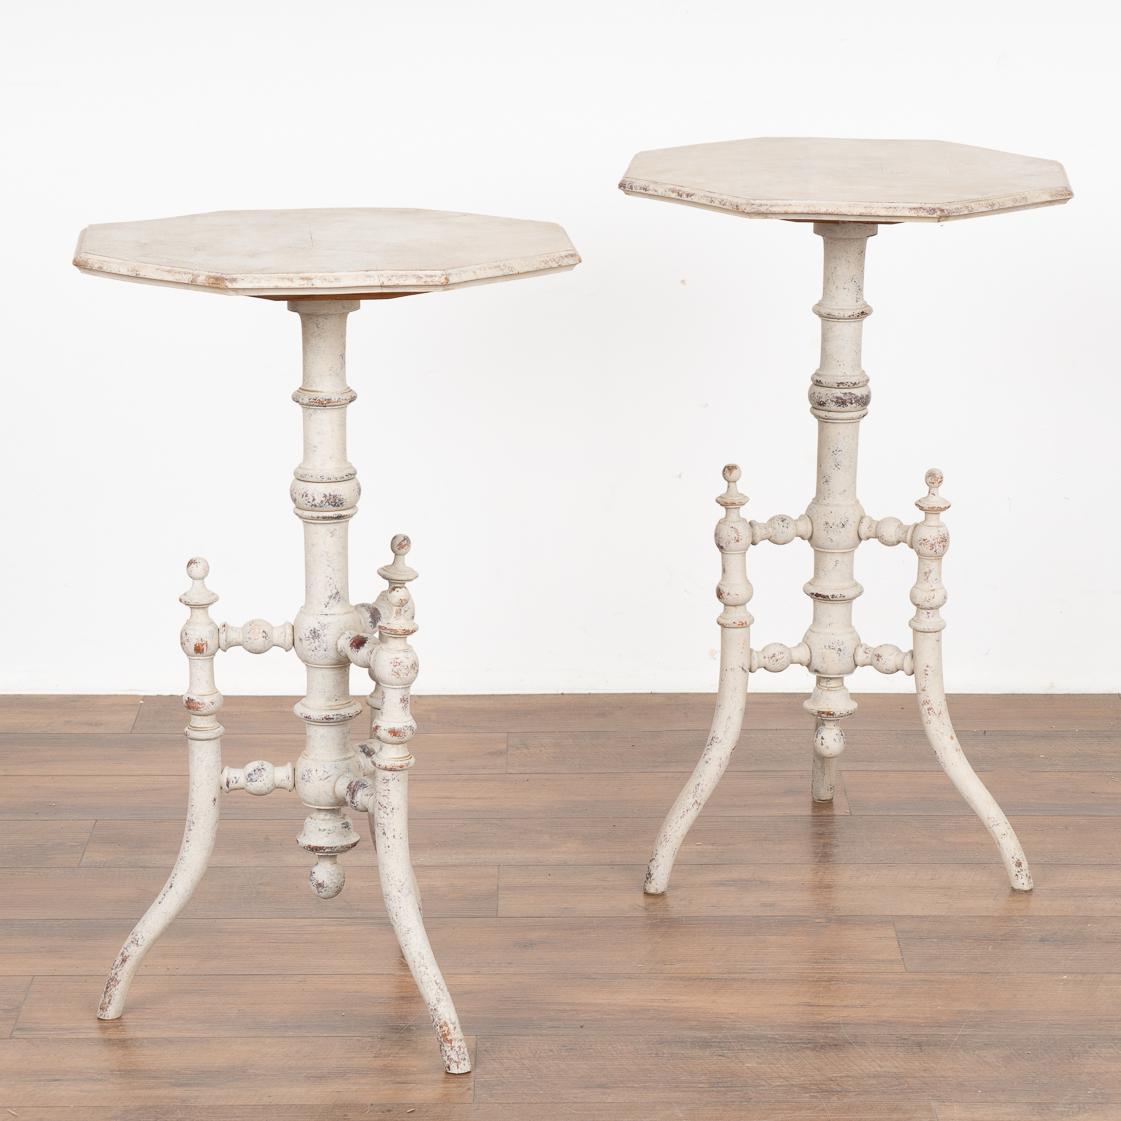 Antique Swedish gustavian tri-foot turned pedestal side table with octagon shaped top.
Later applied professional white painted layered finish, lightly distressed to fit the age and grace of these delightful Swedish accent tables.
Restored, strong